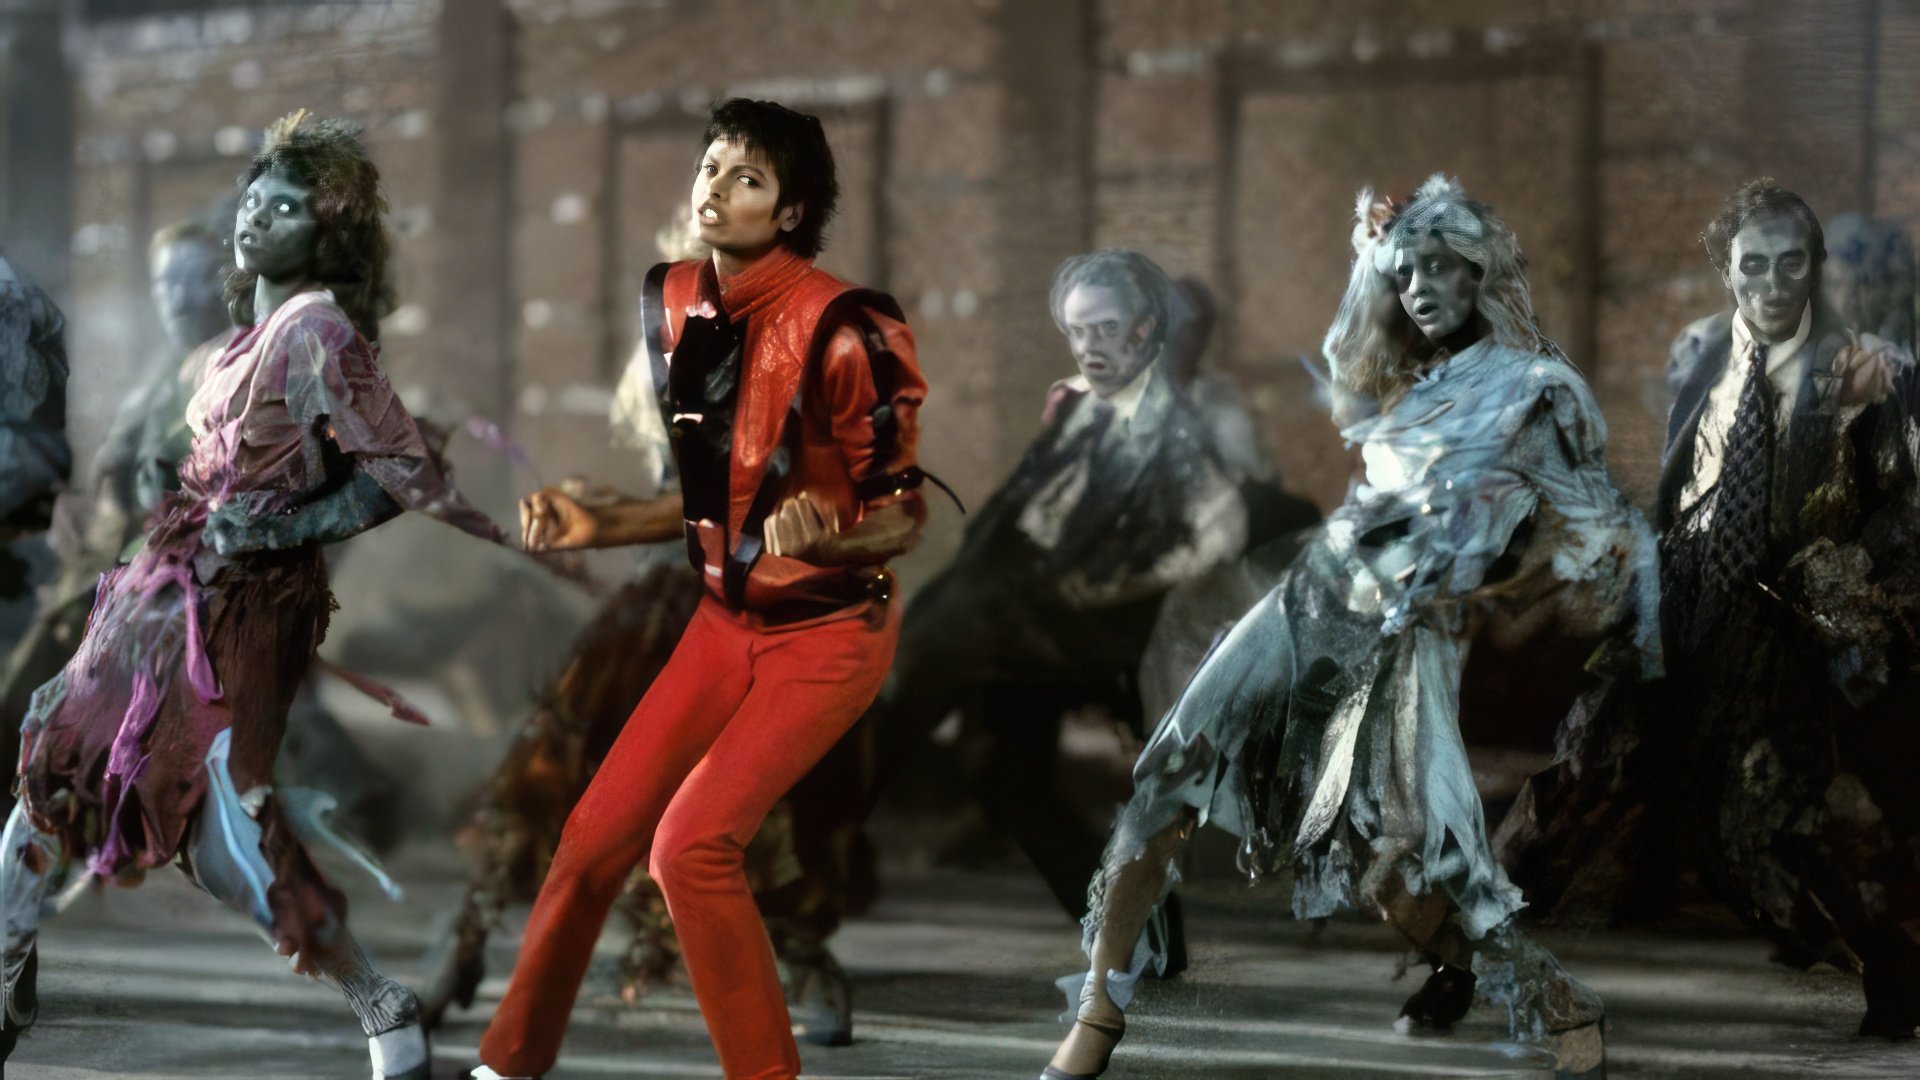 Released in 1982, Thriller became a phenomenon